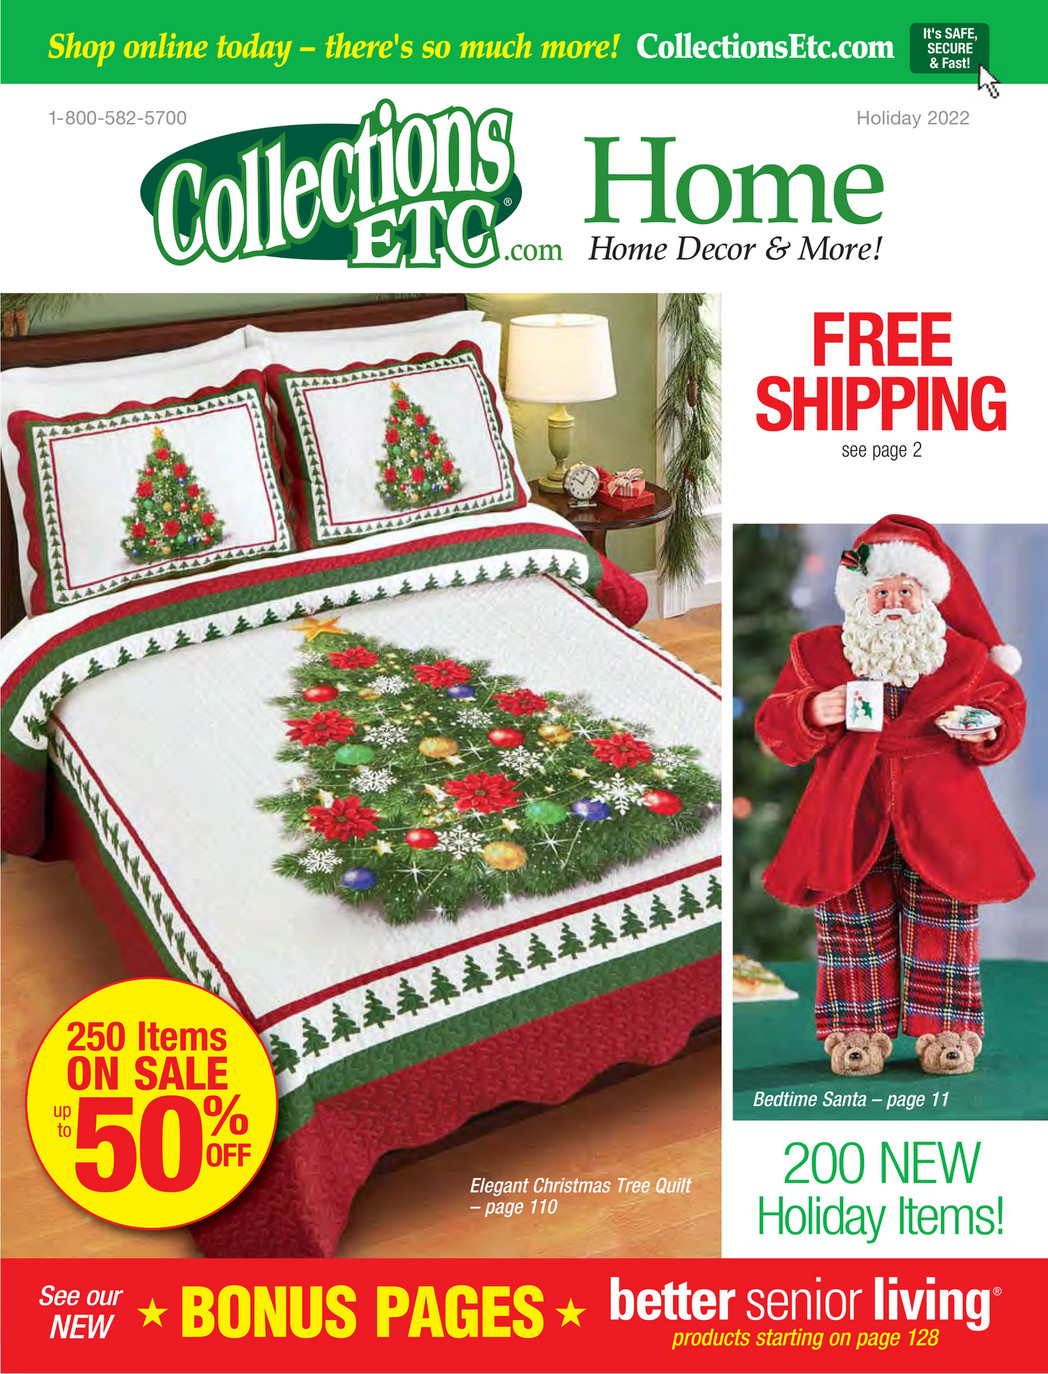 Collections Etc. Home Decor Catalog - Page 1